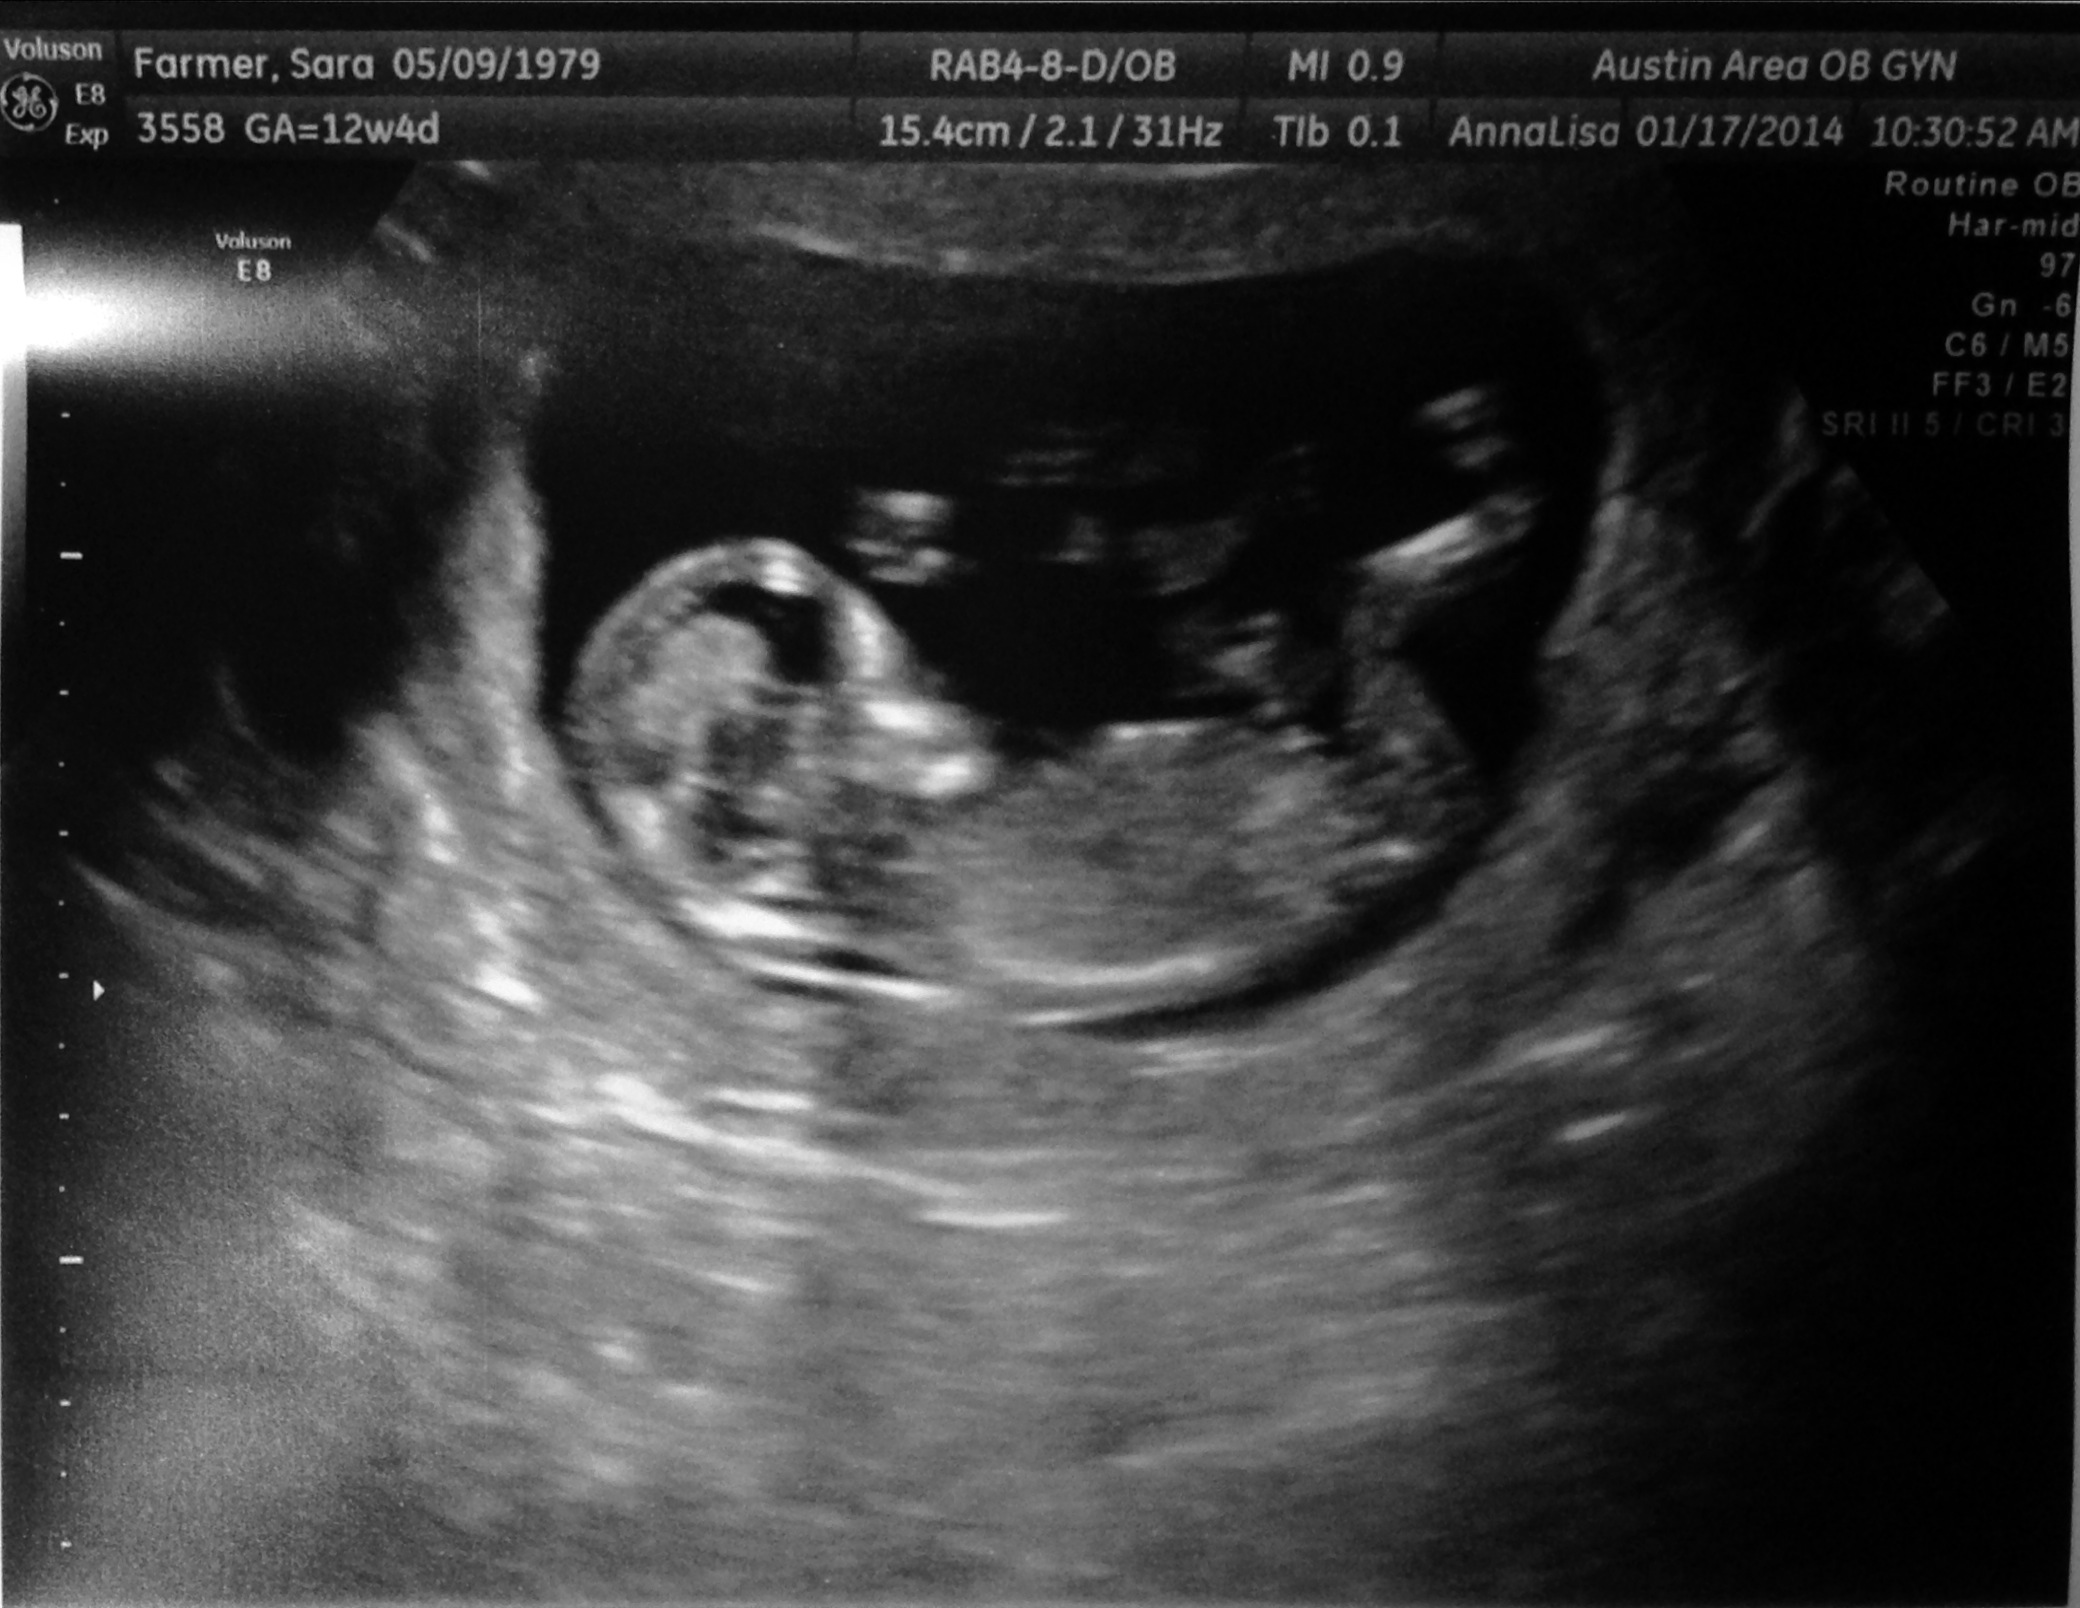 The 12-week Appointment and Ultrasound | Kittymomma's Adventures